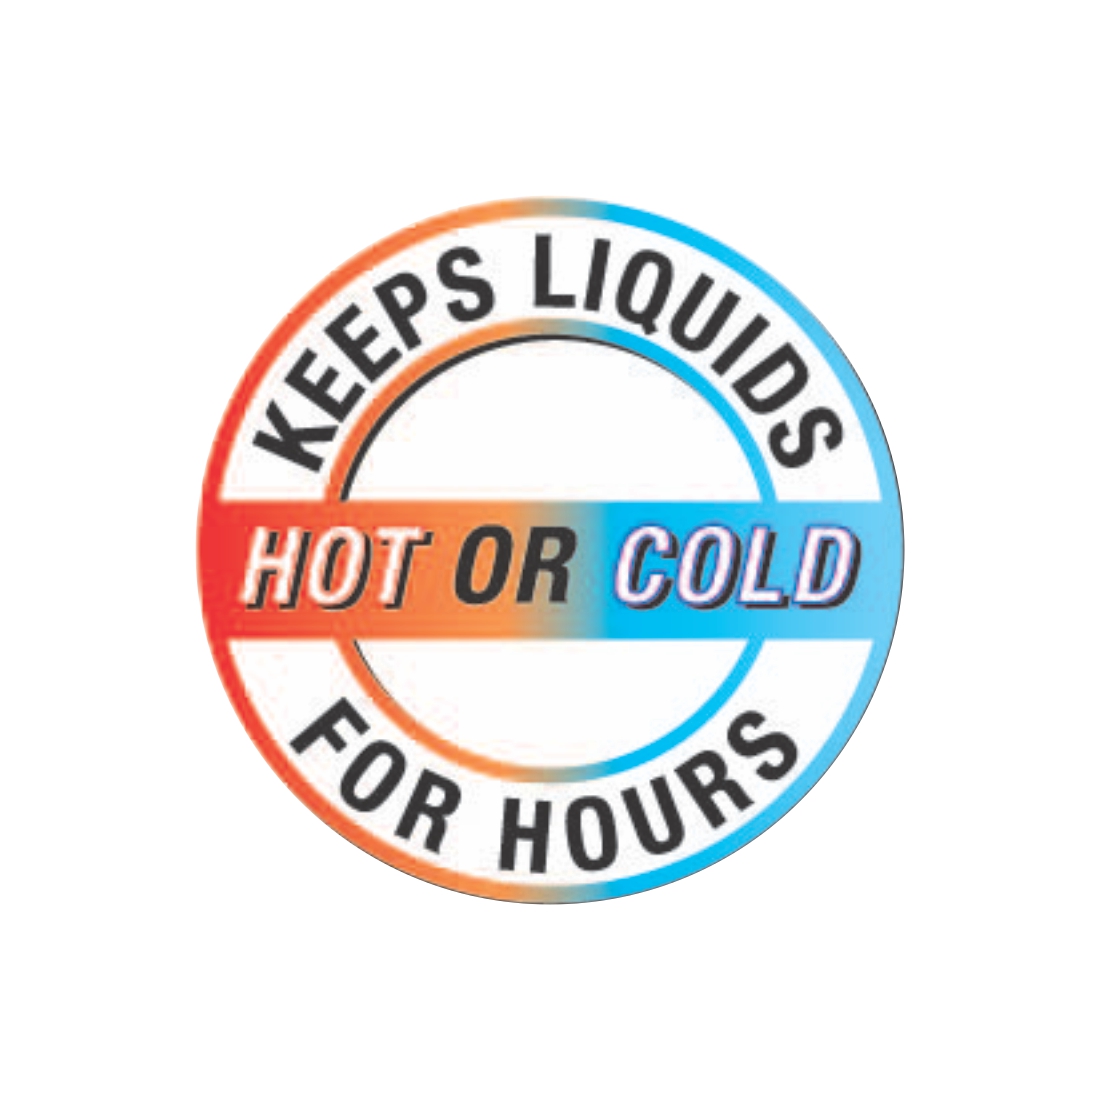 KEEP LIQUIDS HOT OR COLD FOR HOURS